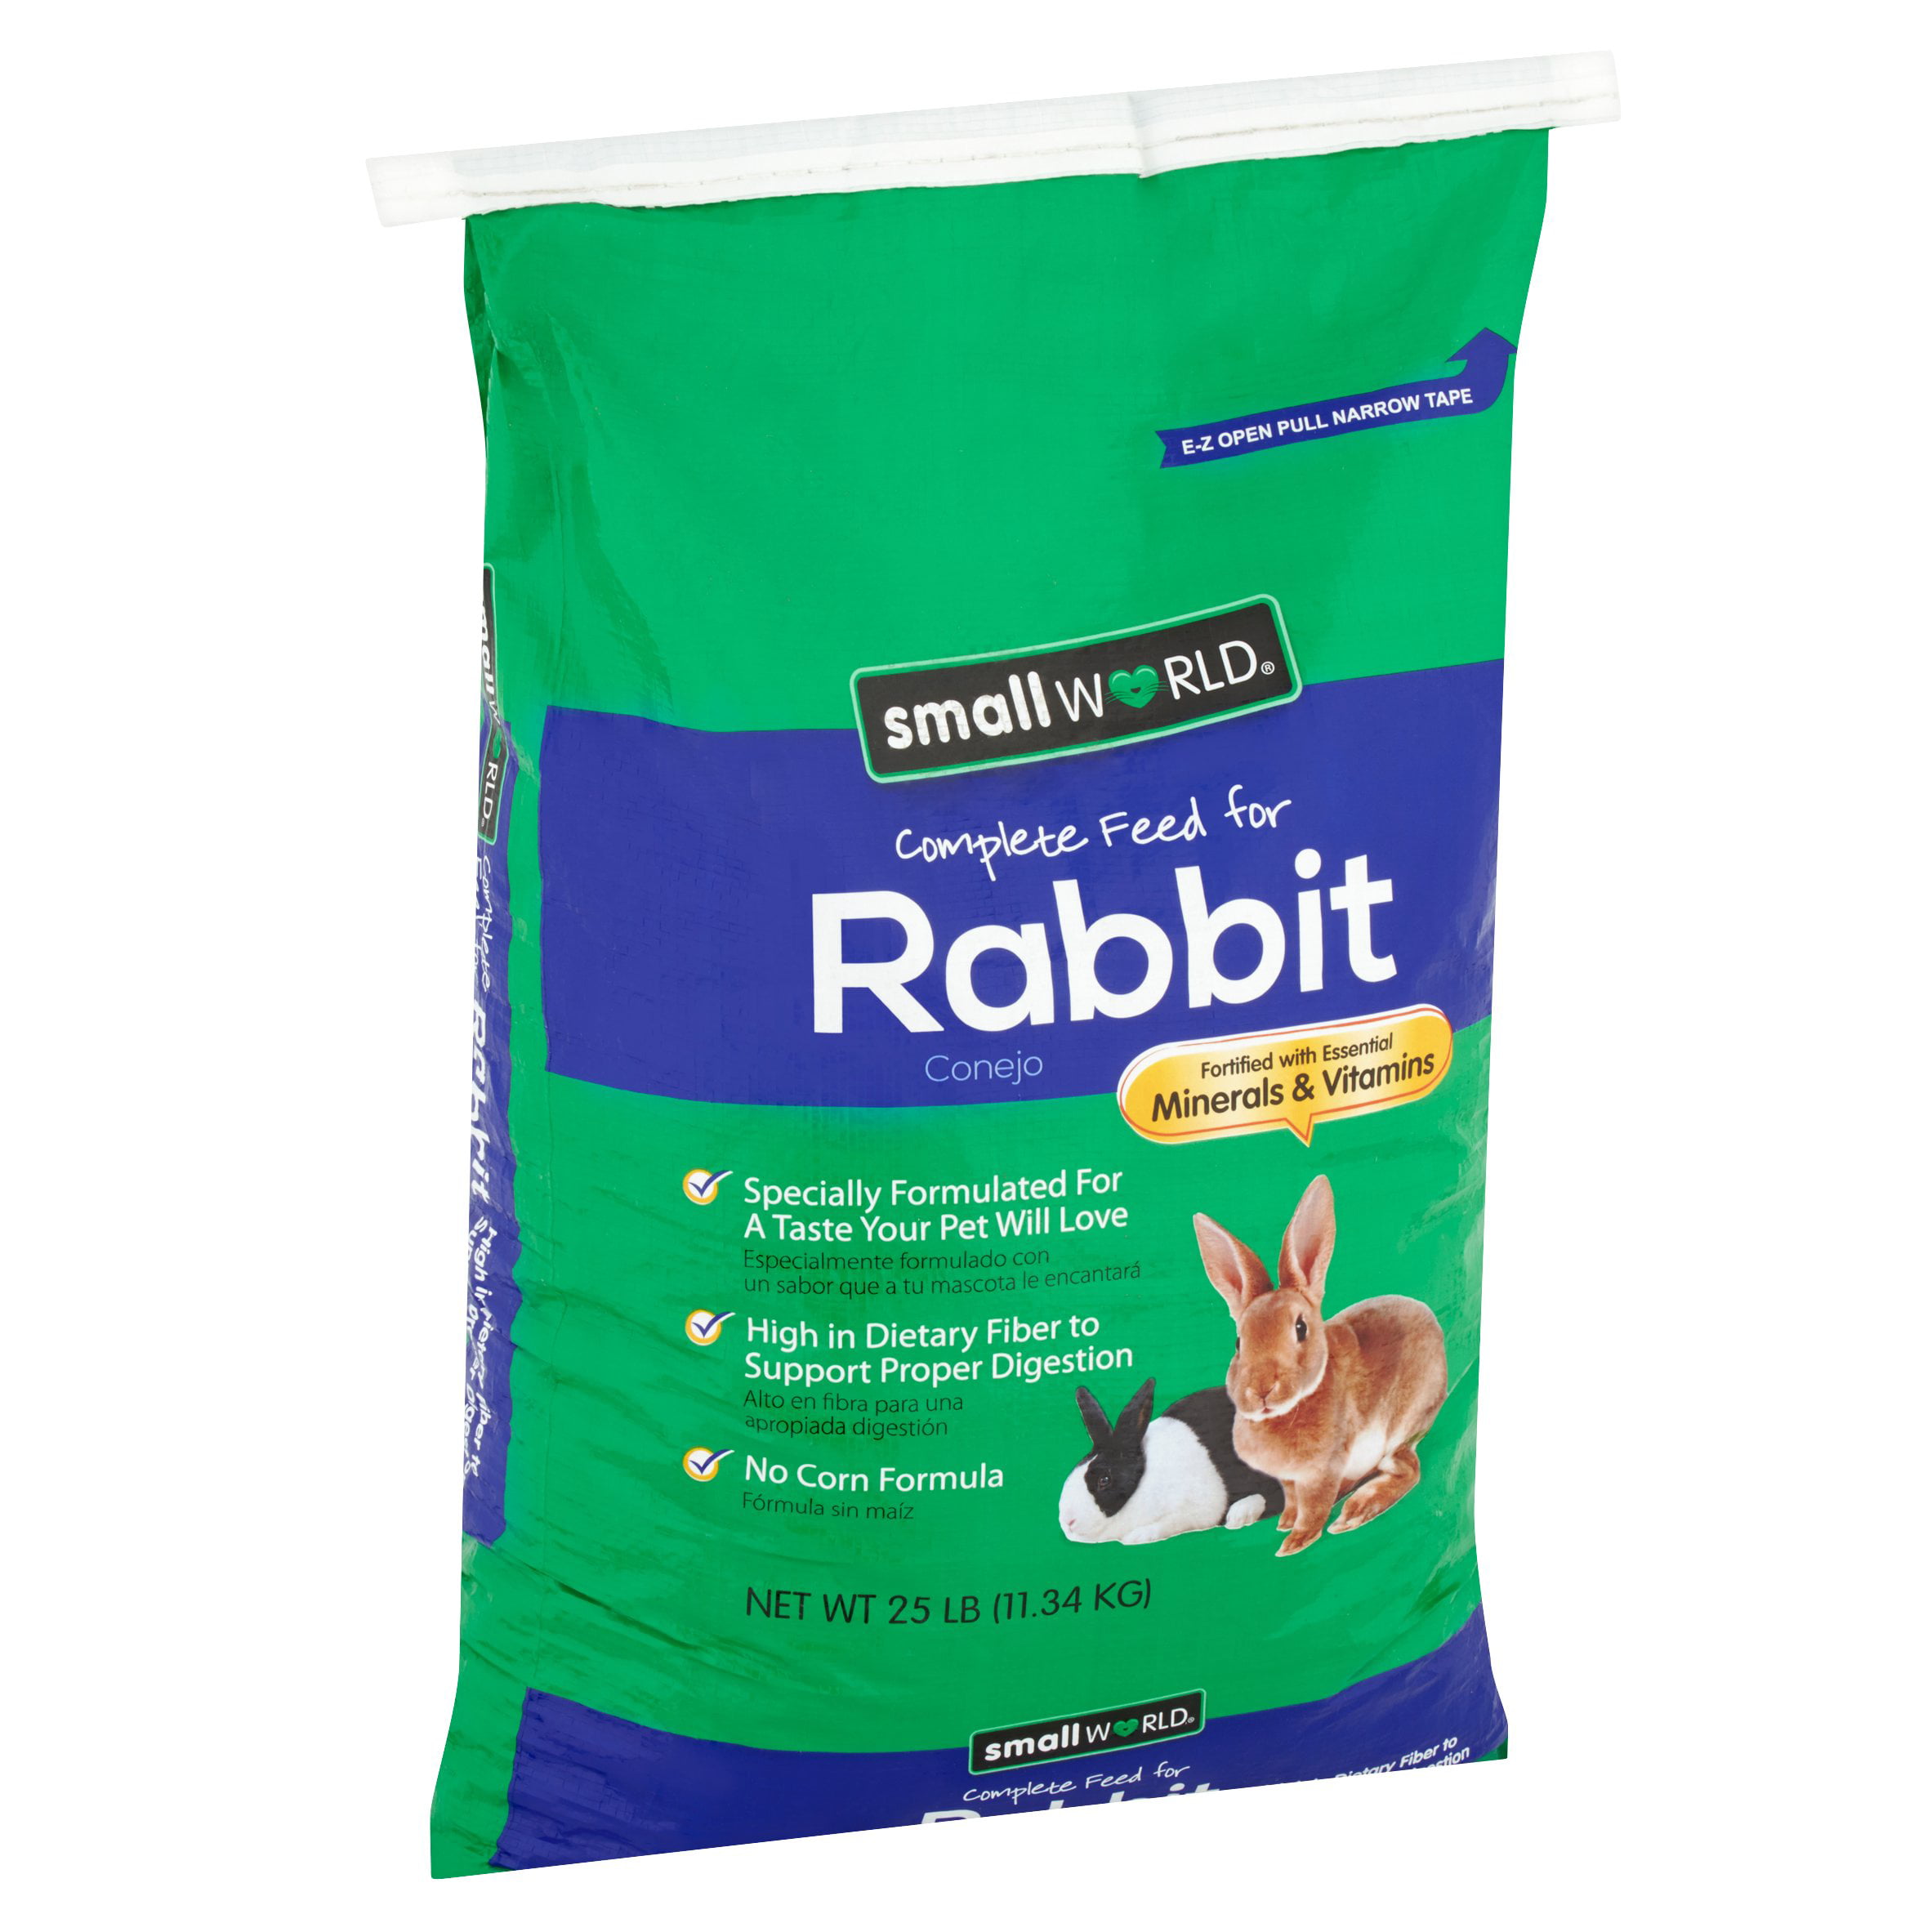 Small World Complete Feed for Rabbits 